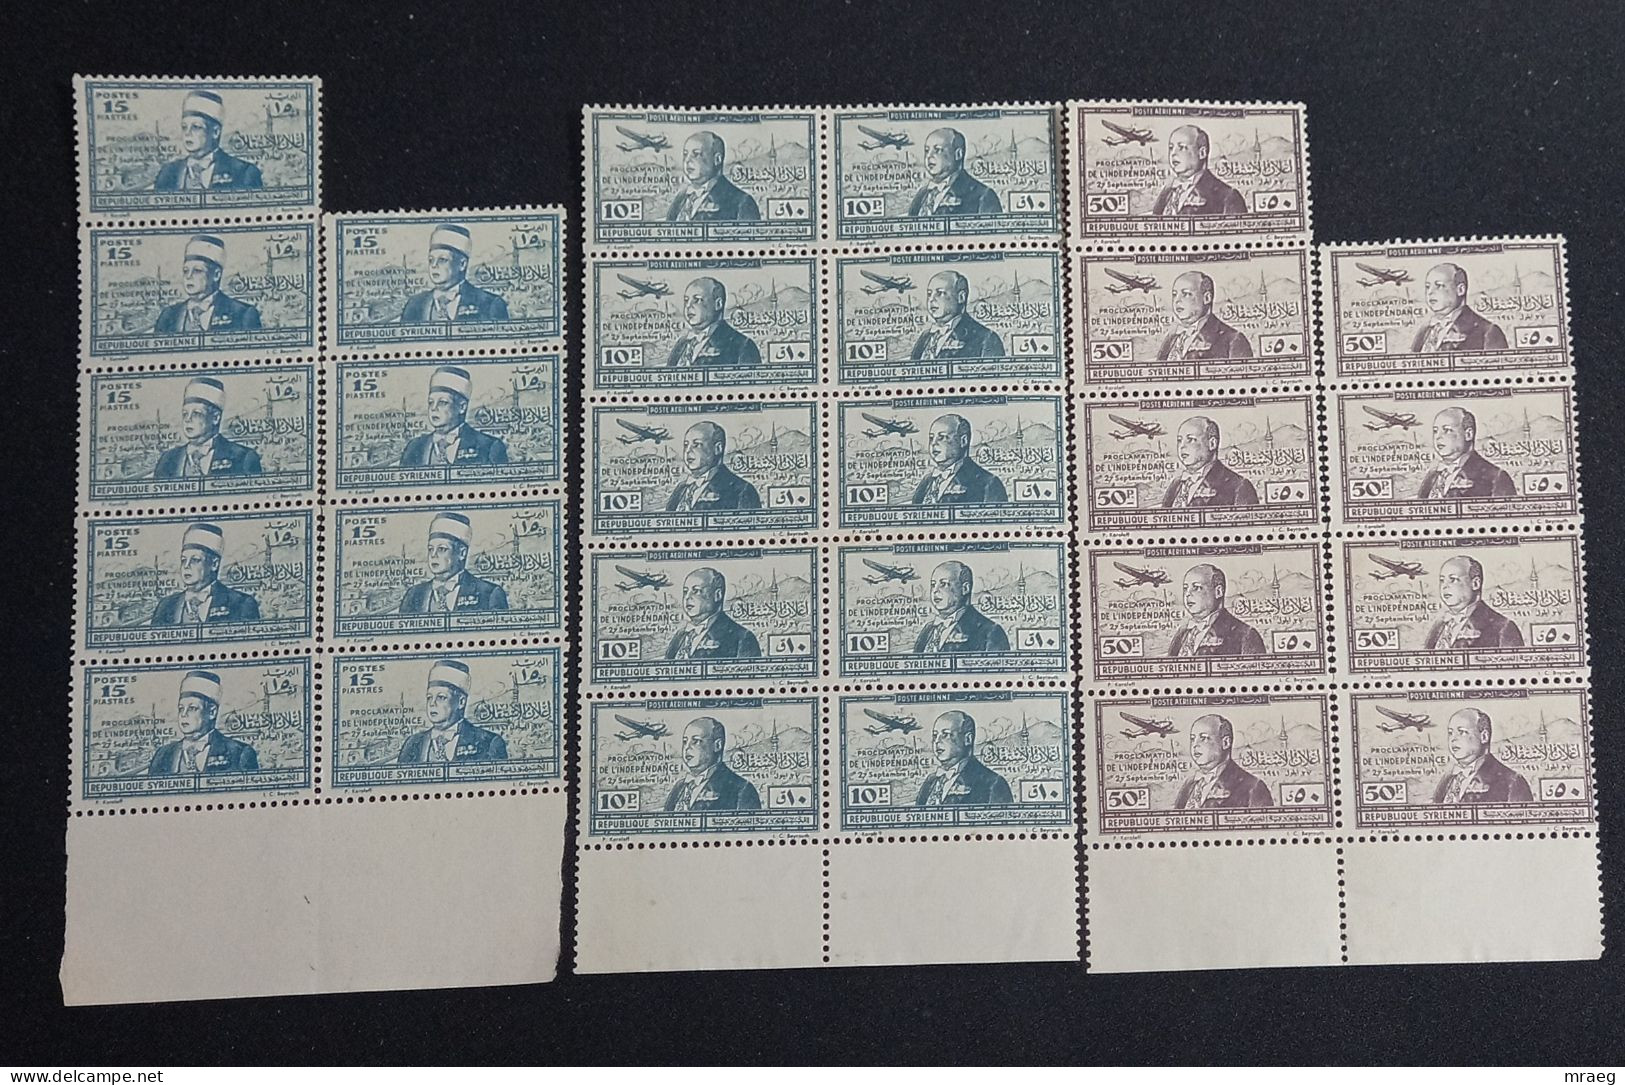 SYRIA 1942 Proclamation Of Independence - President Taj Addin El-Husni BLOCK STAMPS TOTALY 54 UNUSED NG - Syria